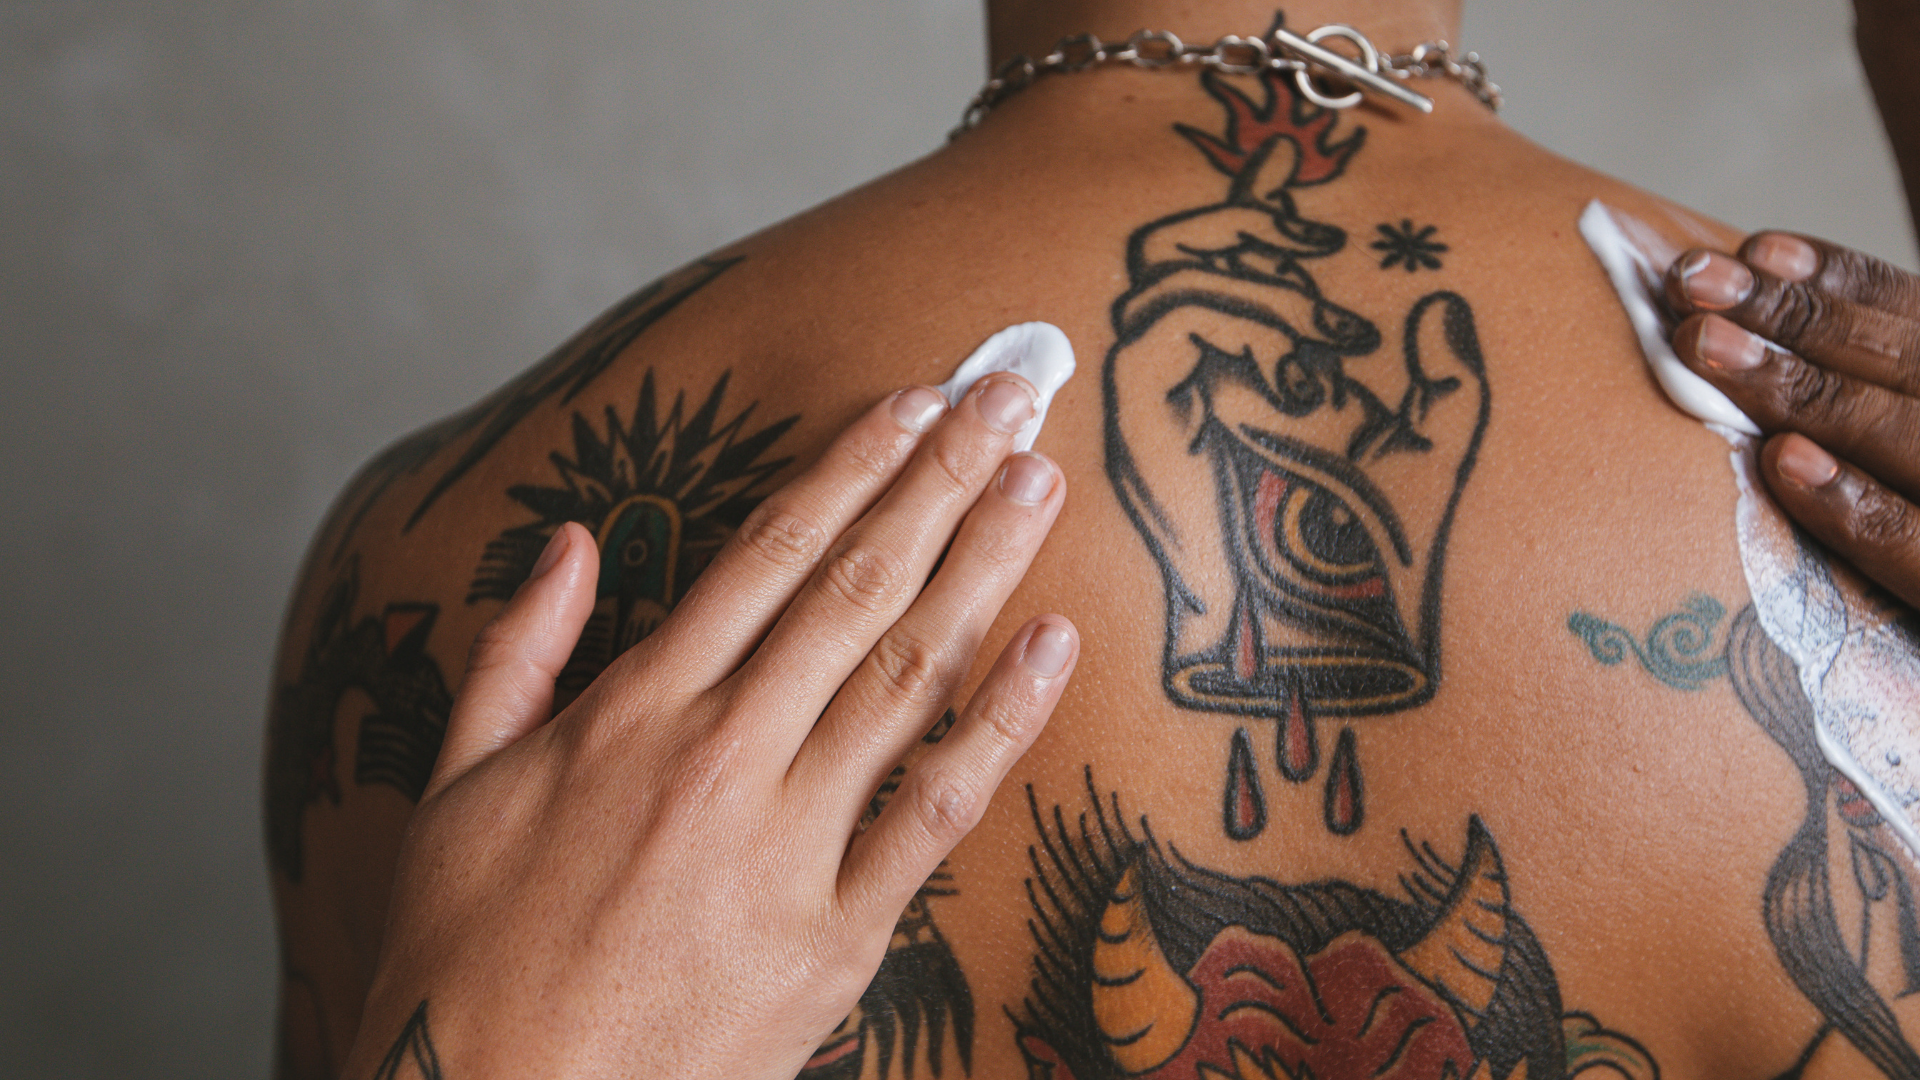 How to Tell When Your Tattoo Has Healed - Inside Out